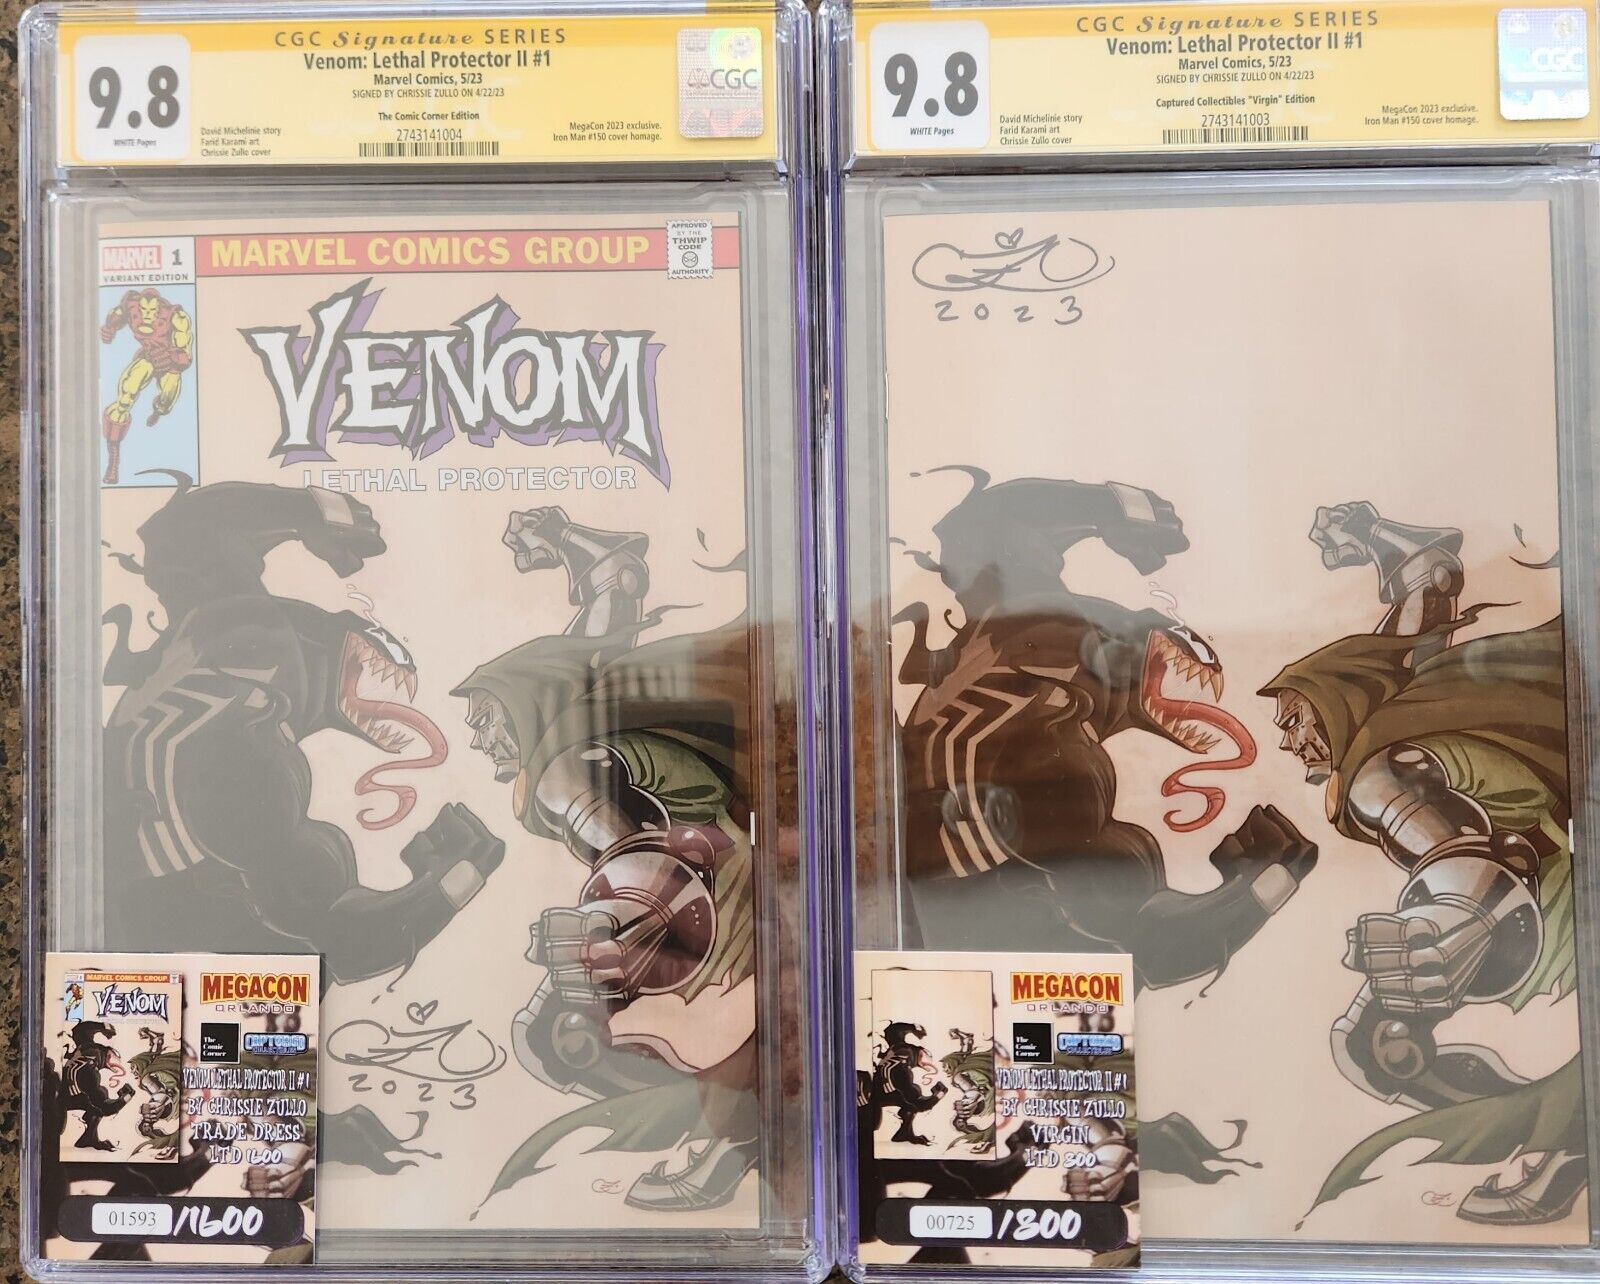 Limited Venom Lethal Protector #1 Chrissie Zullo Signed Variant Set. CGC 9.8